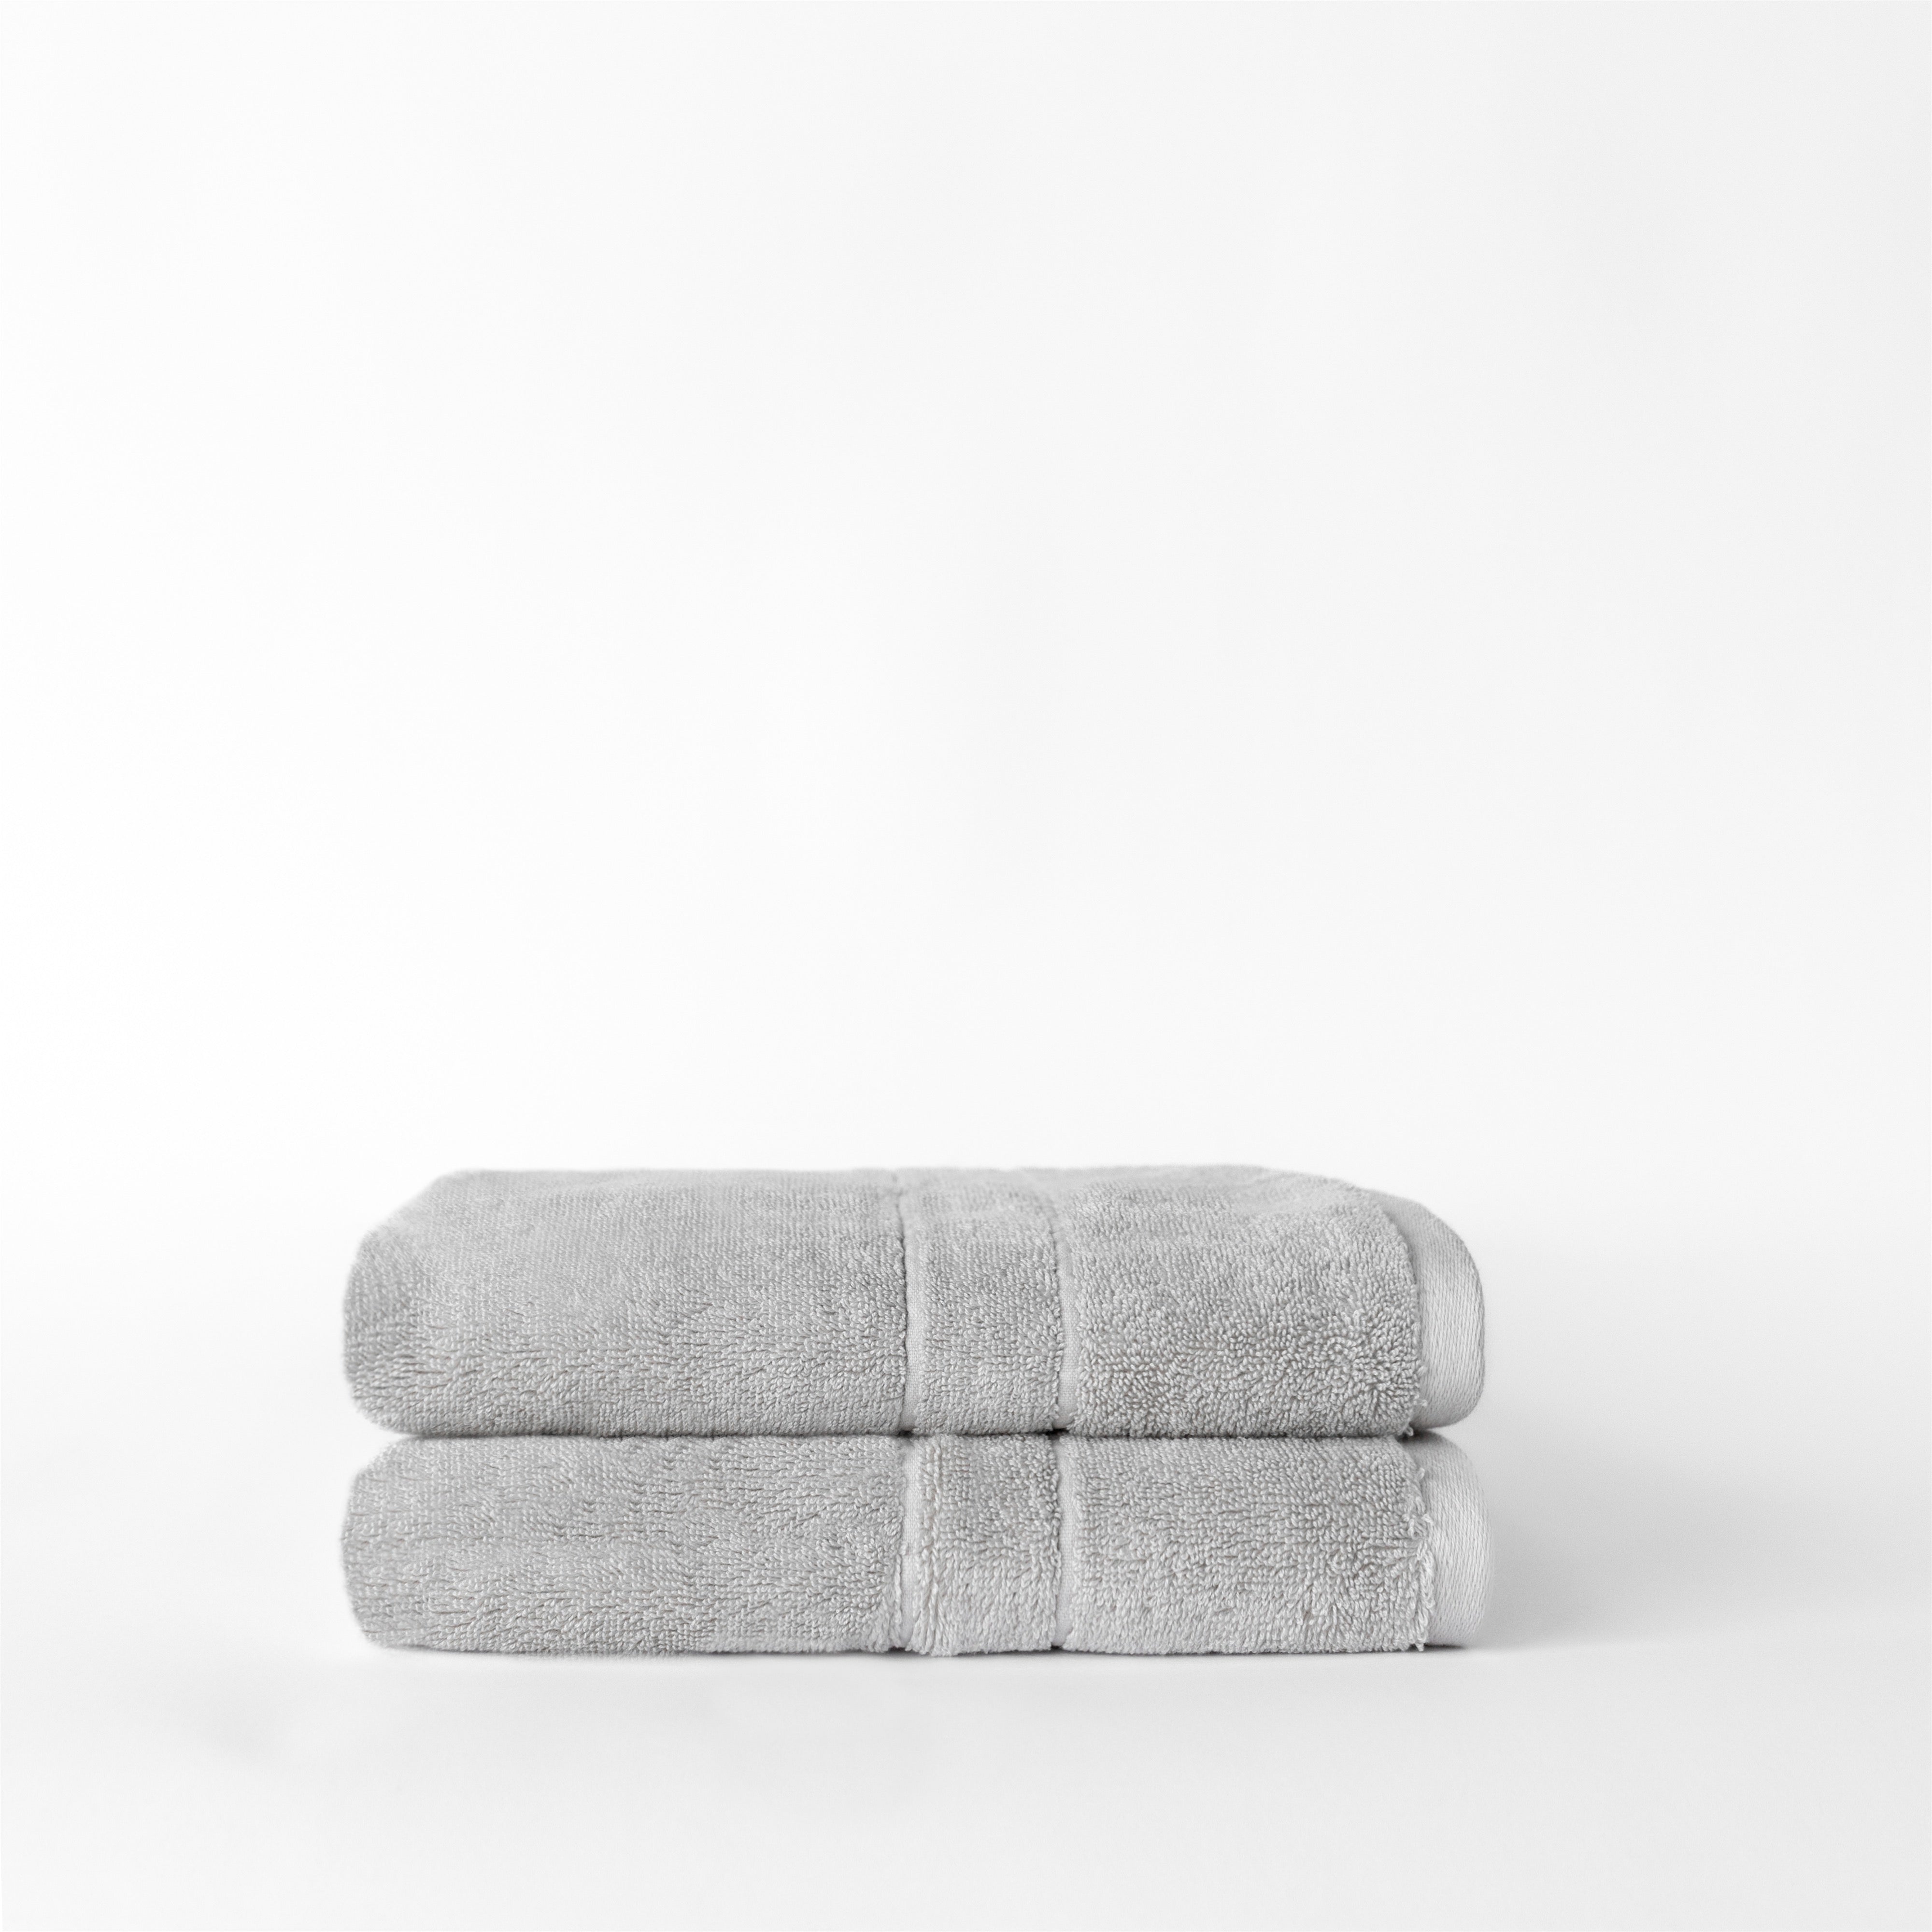 Premium Plush Hand Towels in the color Light Grey. Photo of Complete Premium Plush Hand Towel taken with white background |Color:Light Grey